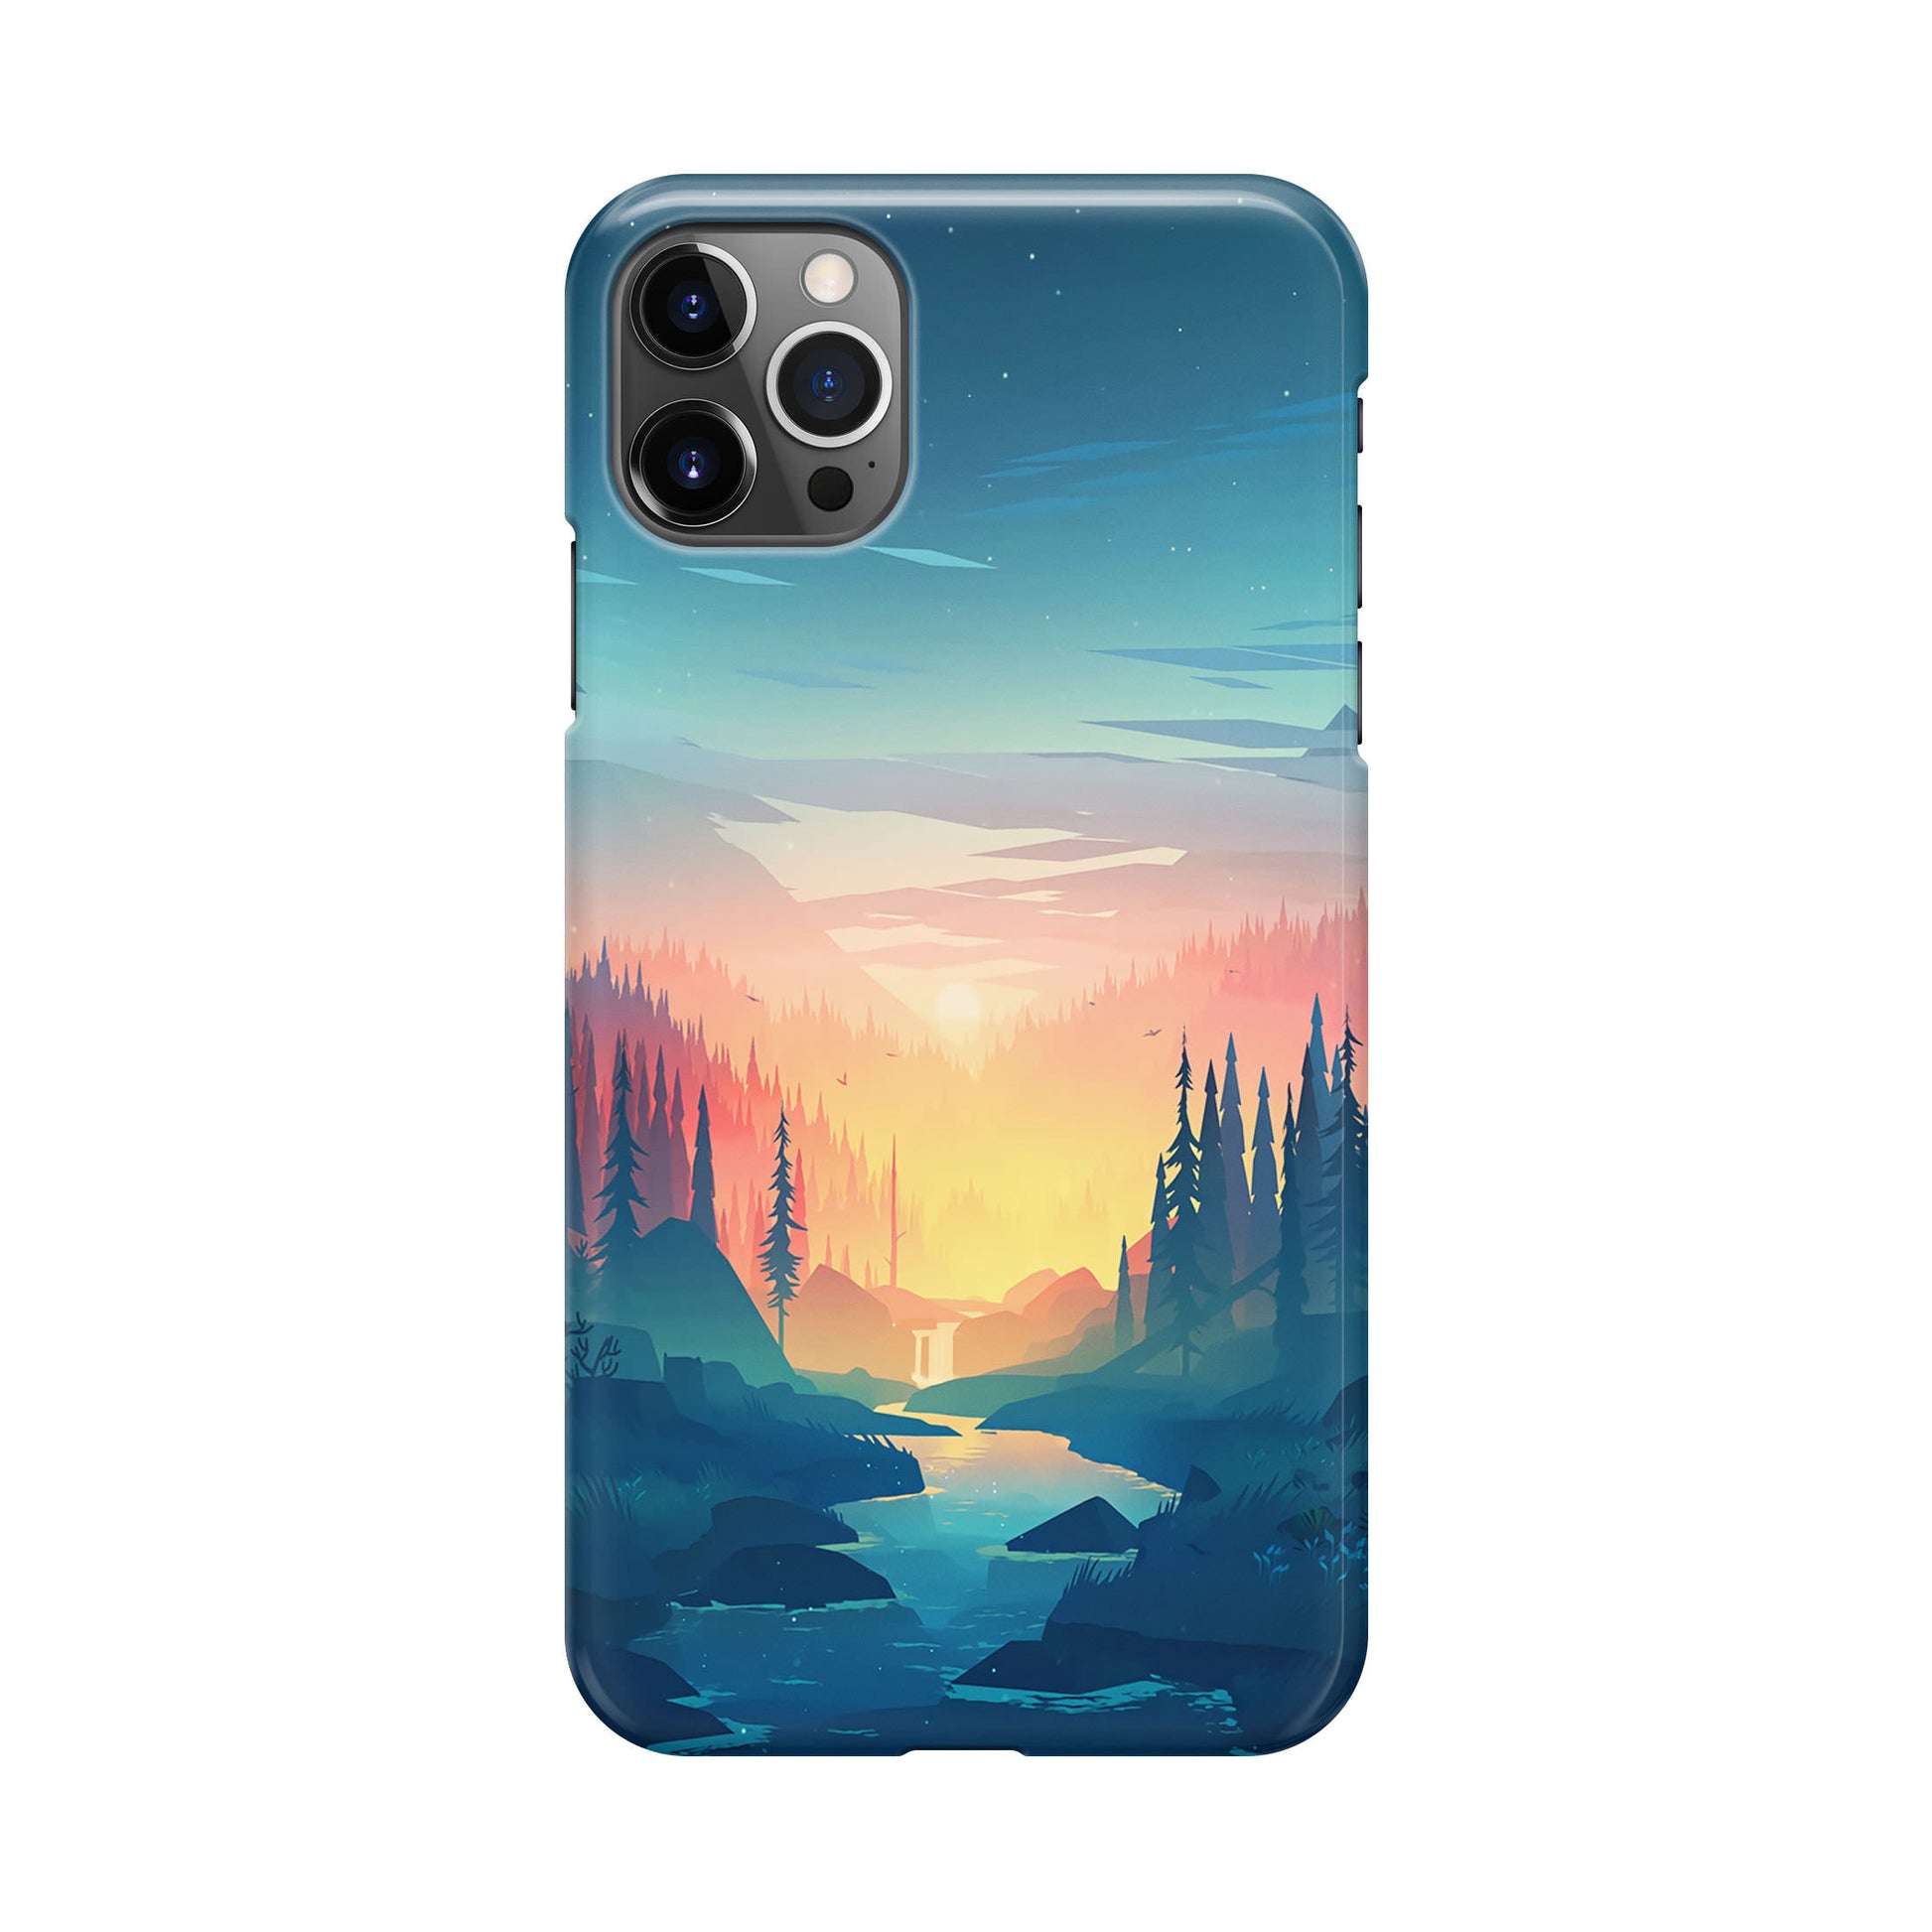 Sunset at The River iPhone 12 Pro Max Case